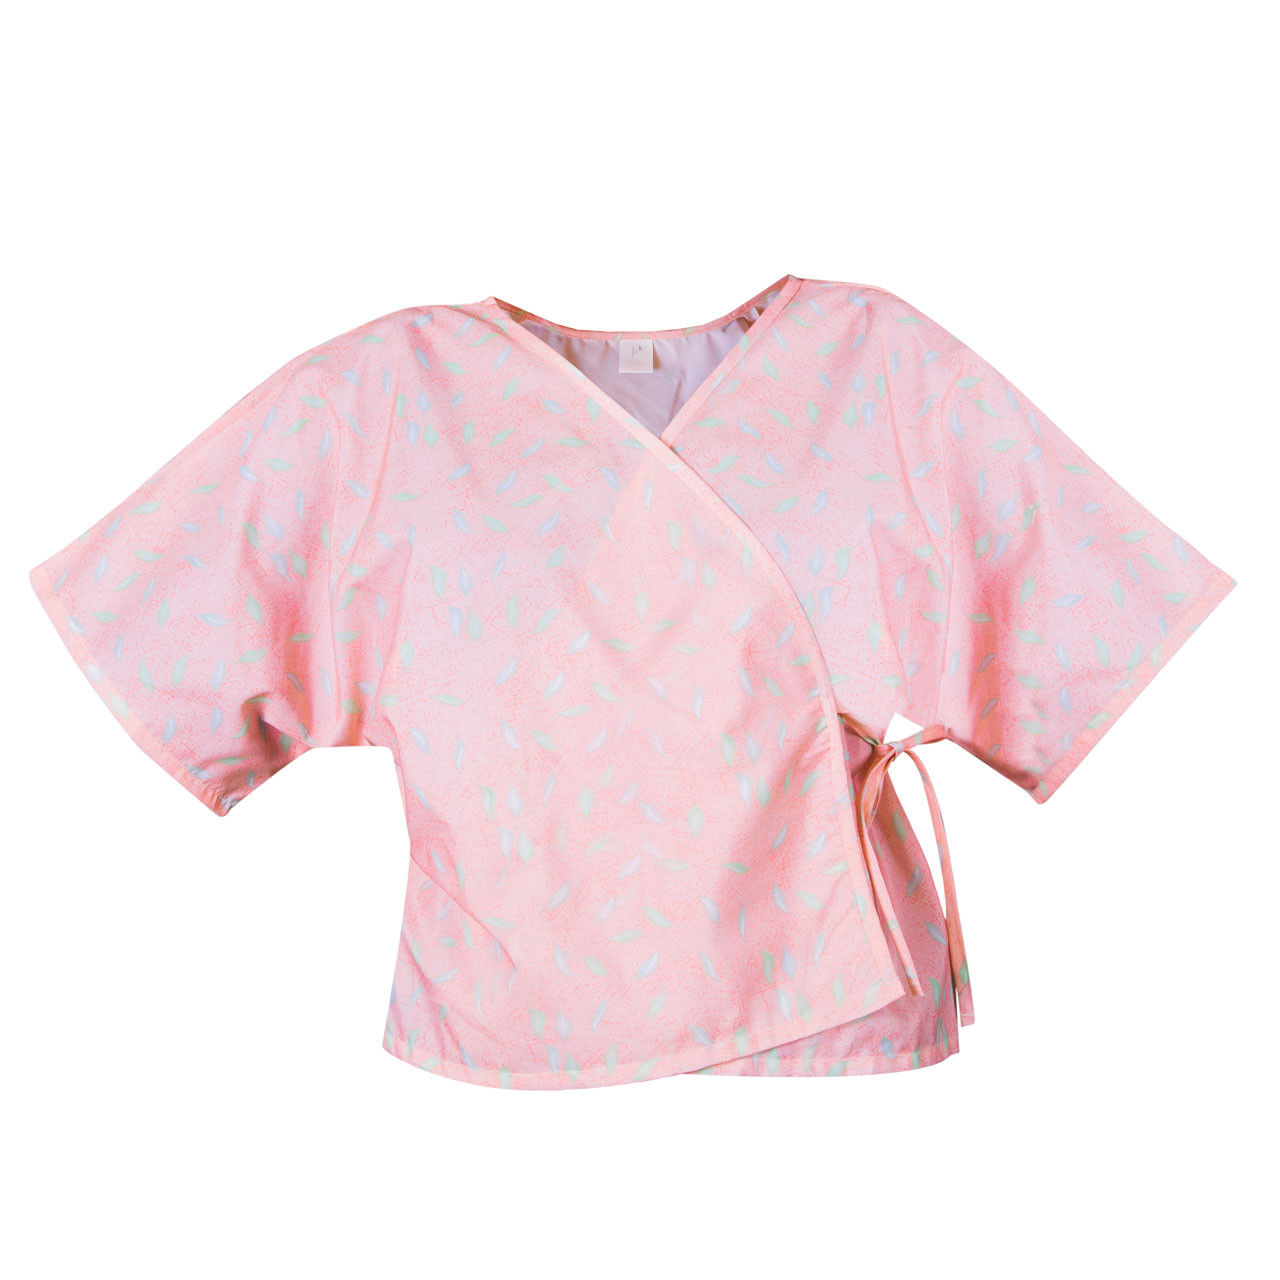 Mammography Cape by American Dawn Questions & Answers